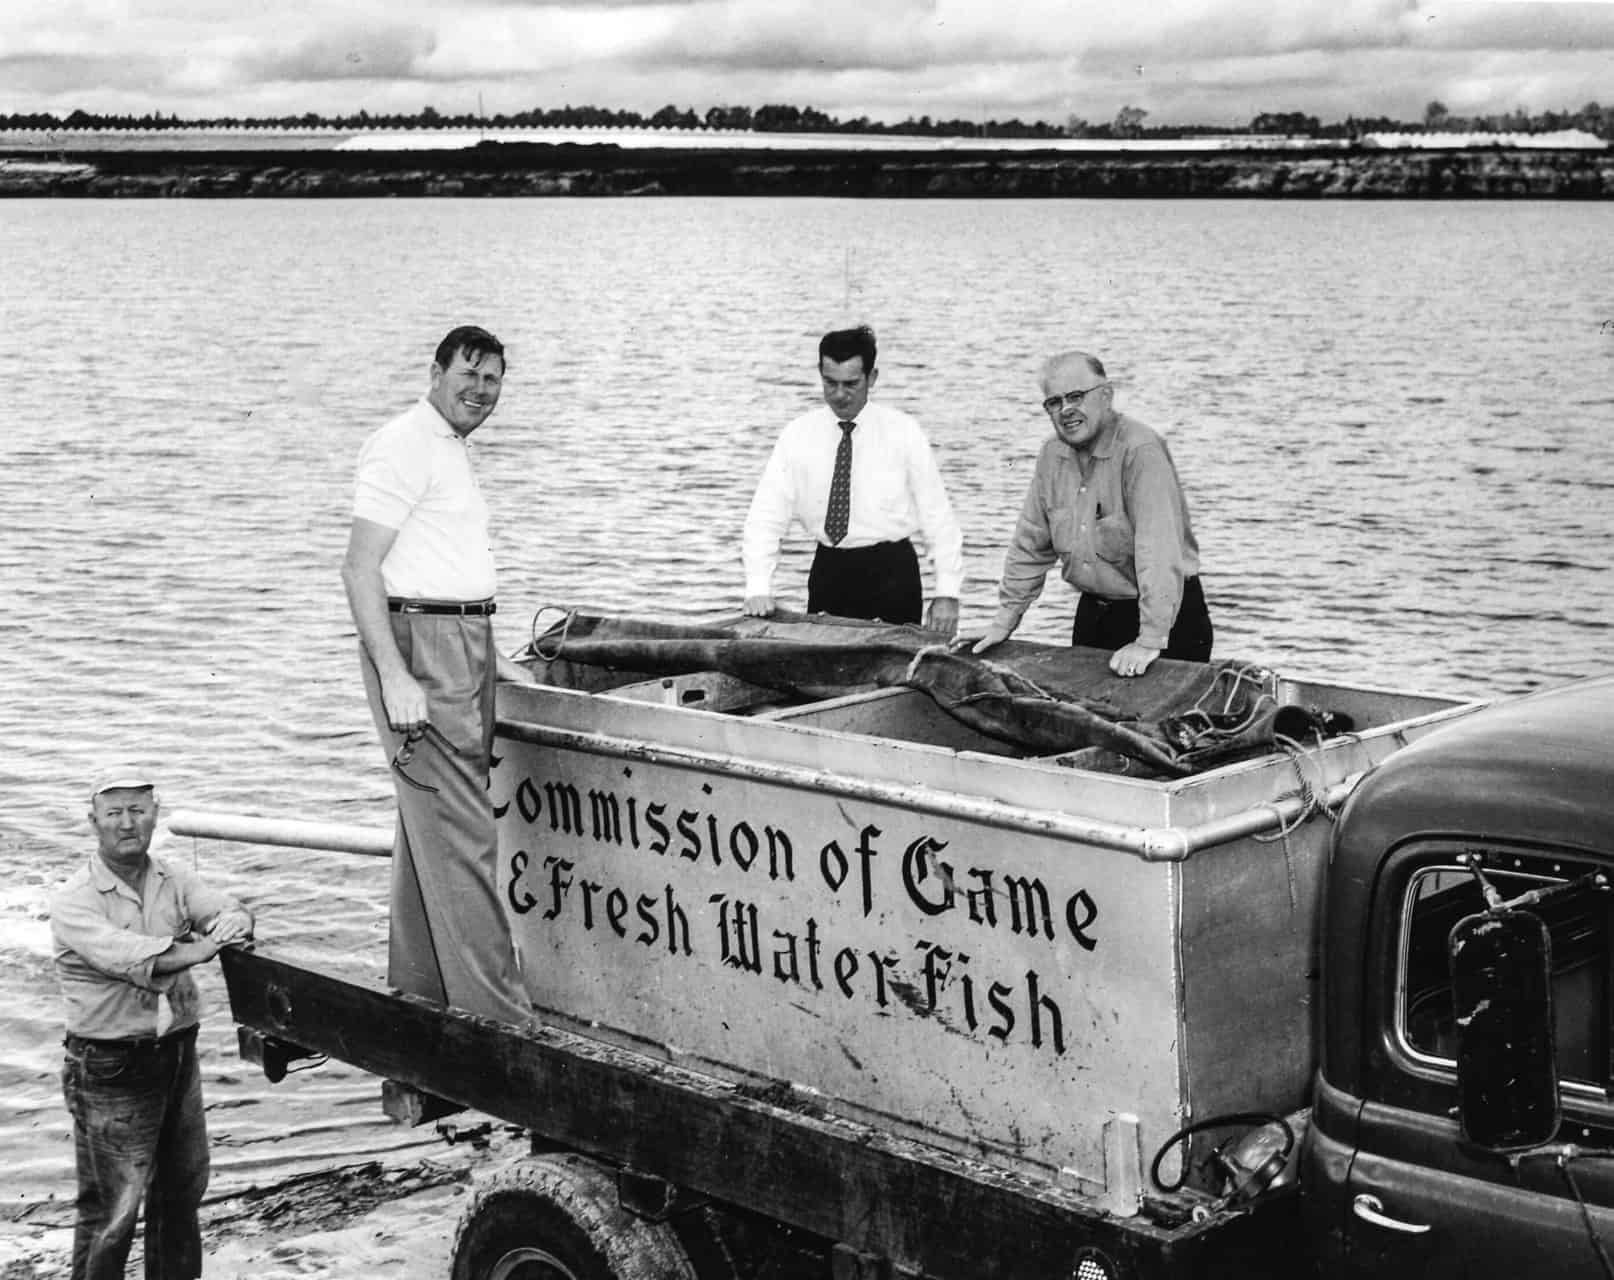 Bill france sr. Works with the commission of game & fresh water fish to fill lake lloyd with bass and catfish. Photo by isc images & archives